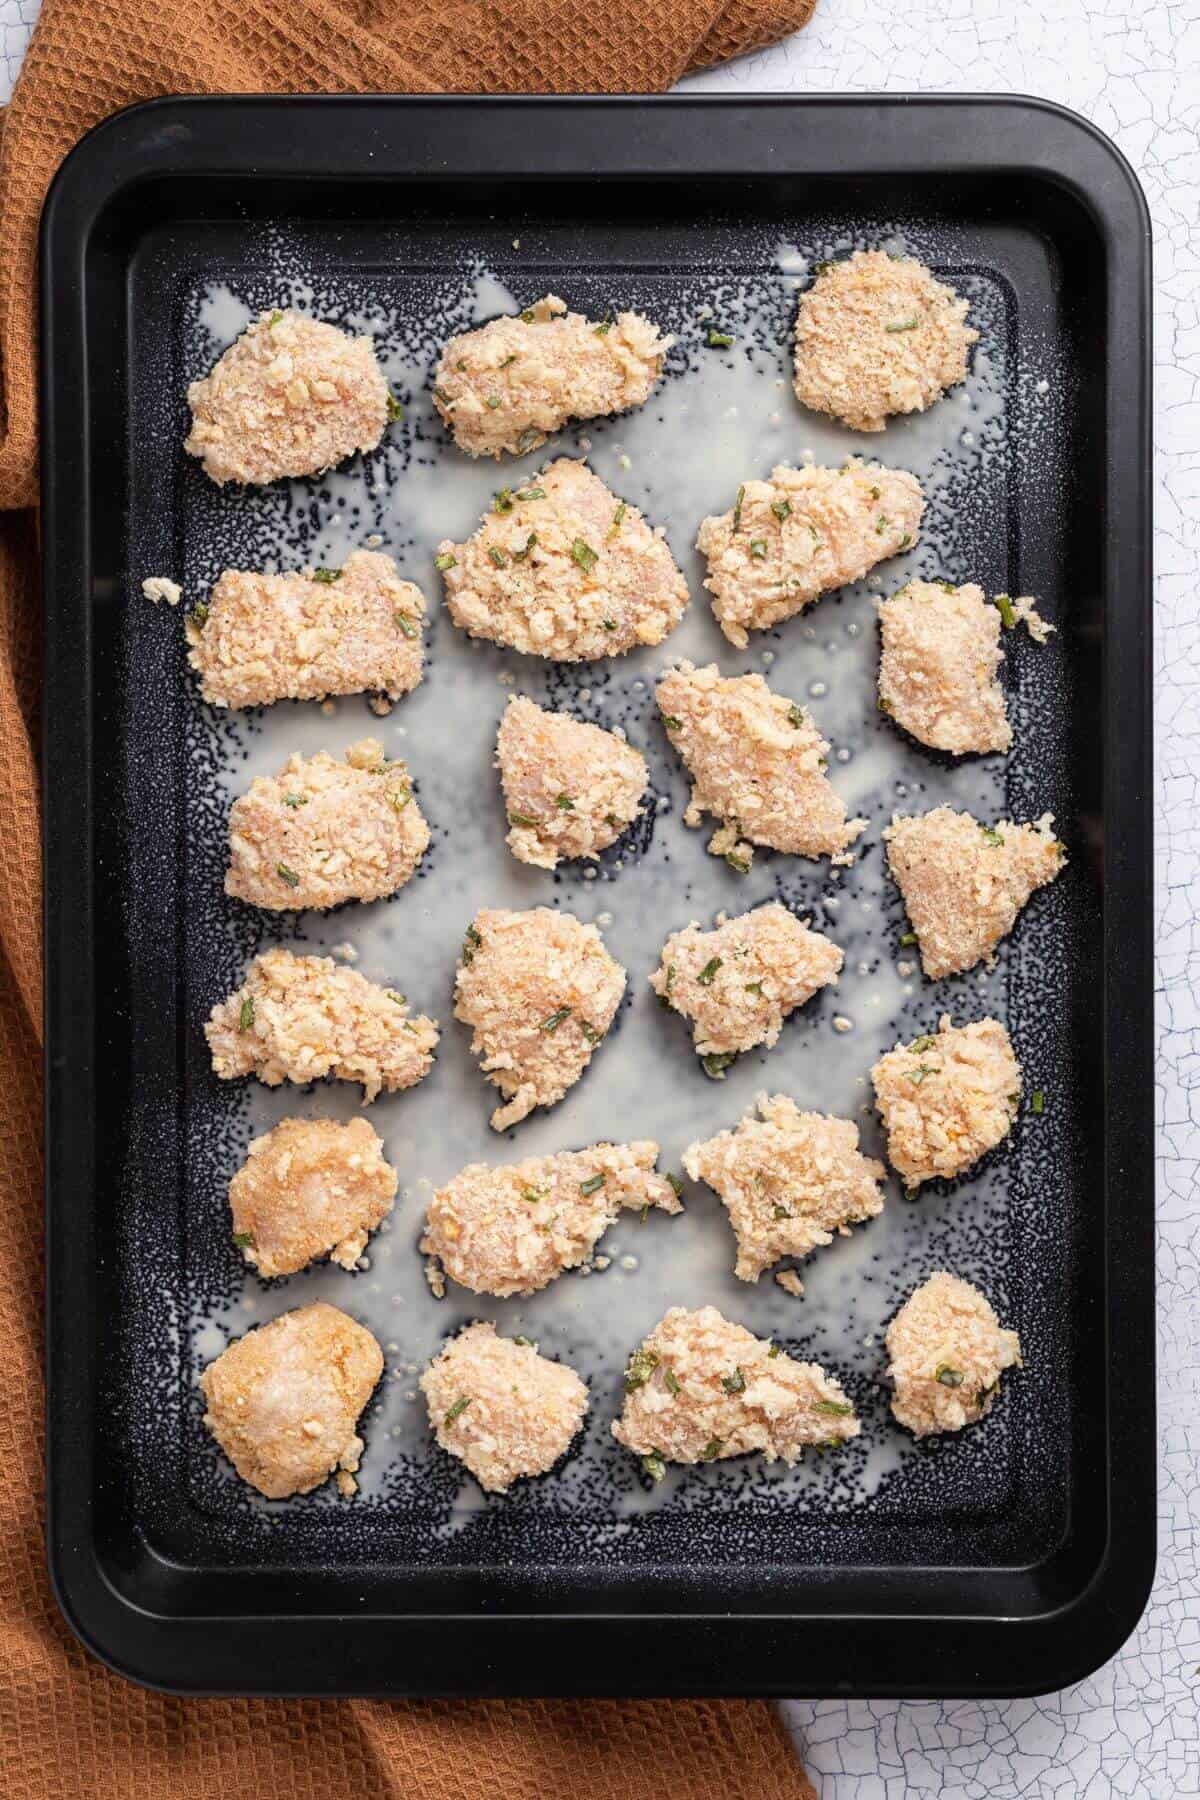 Coated chicken pieces on a baking sheet.